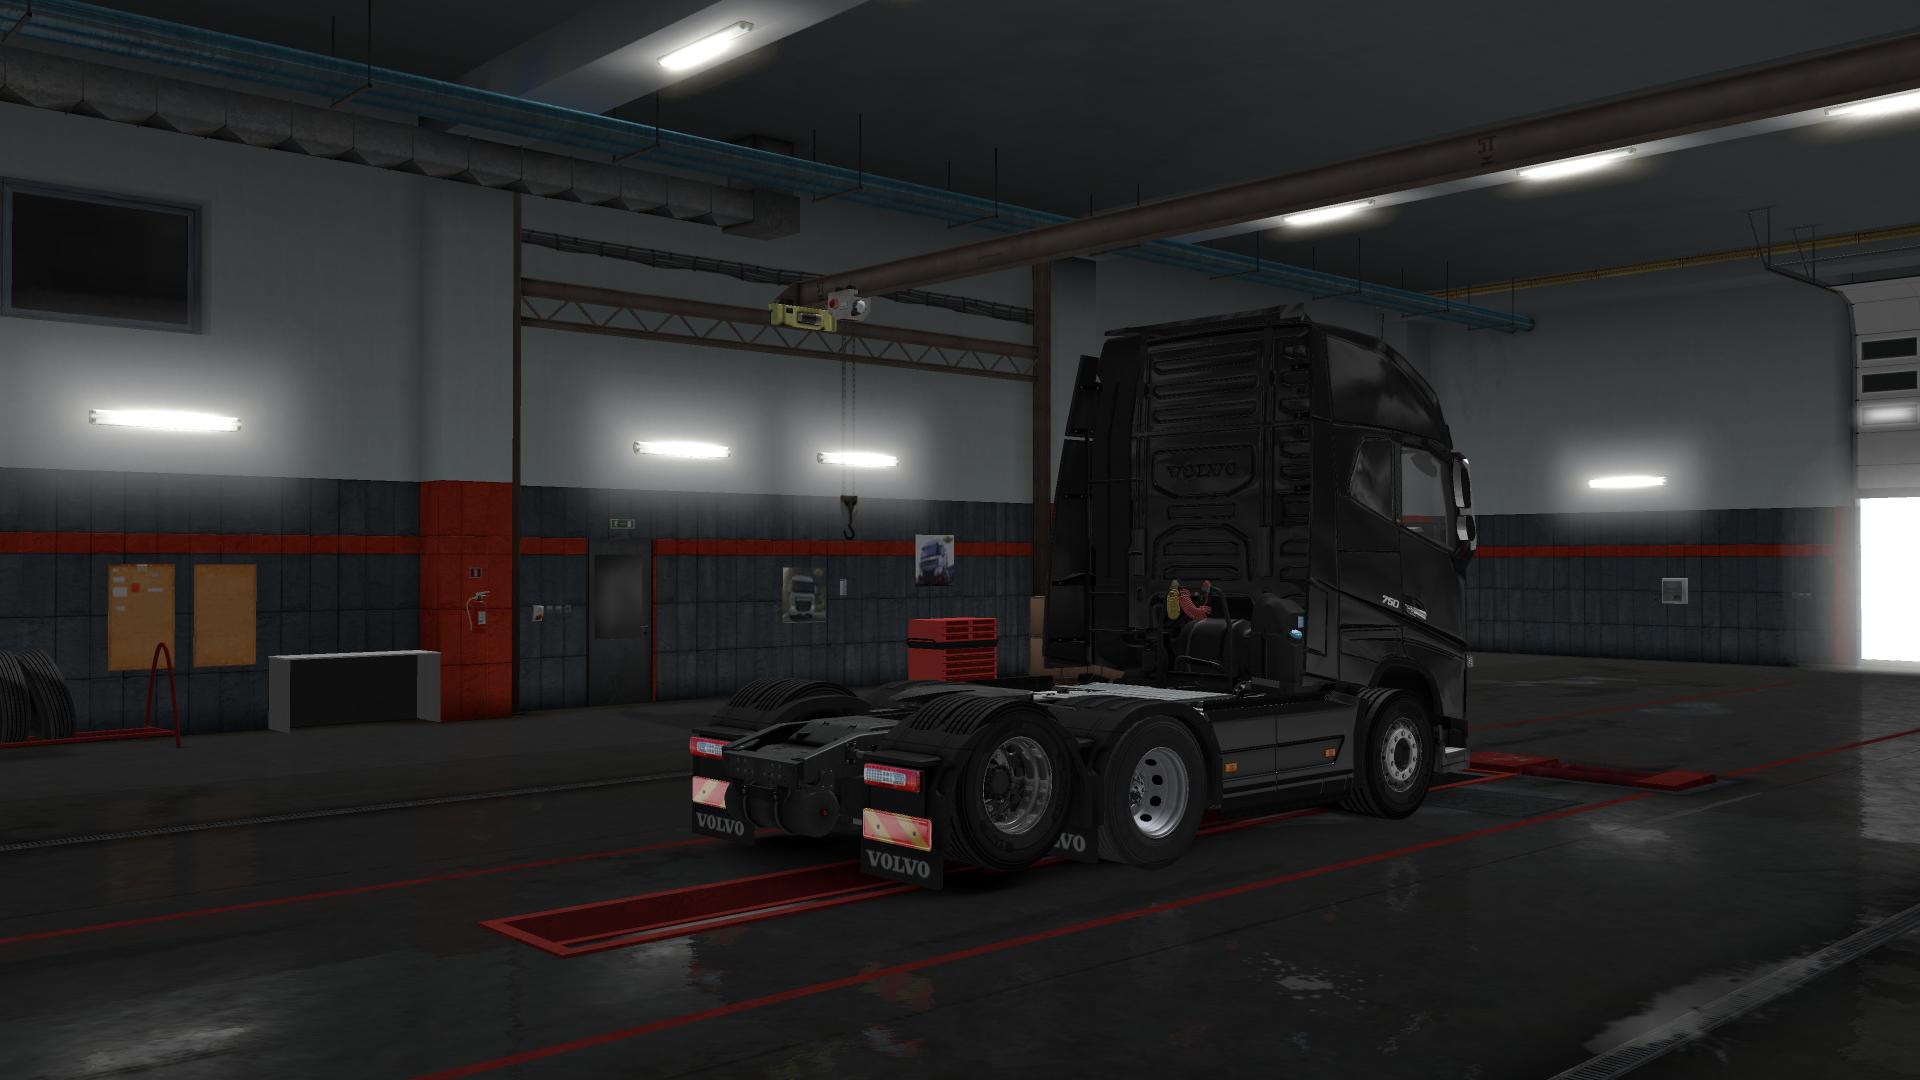 Higher lifted axle pack 1.34